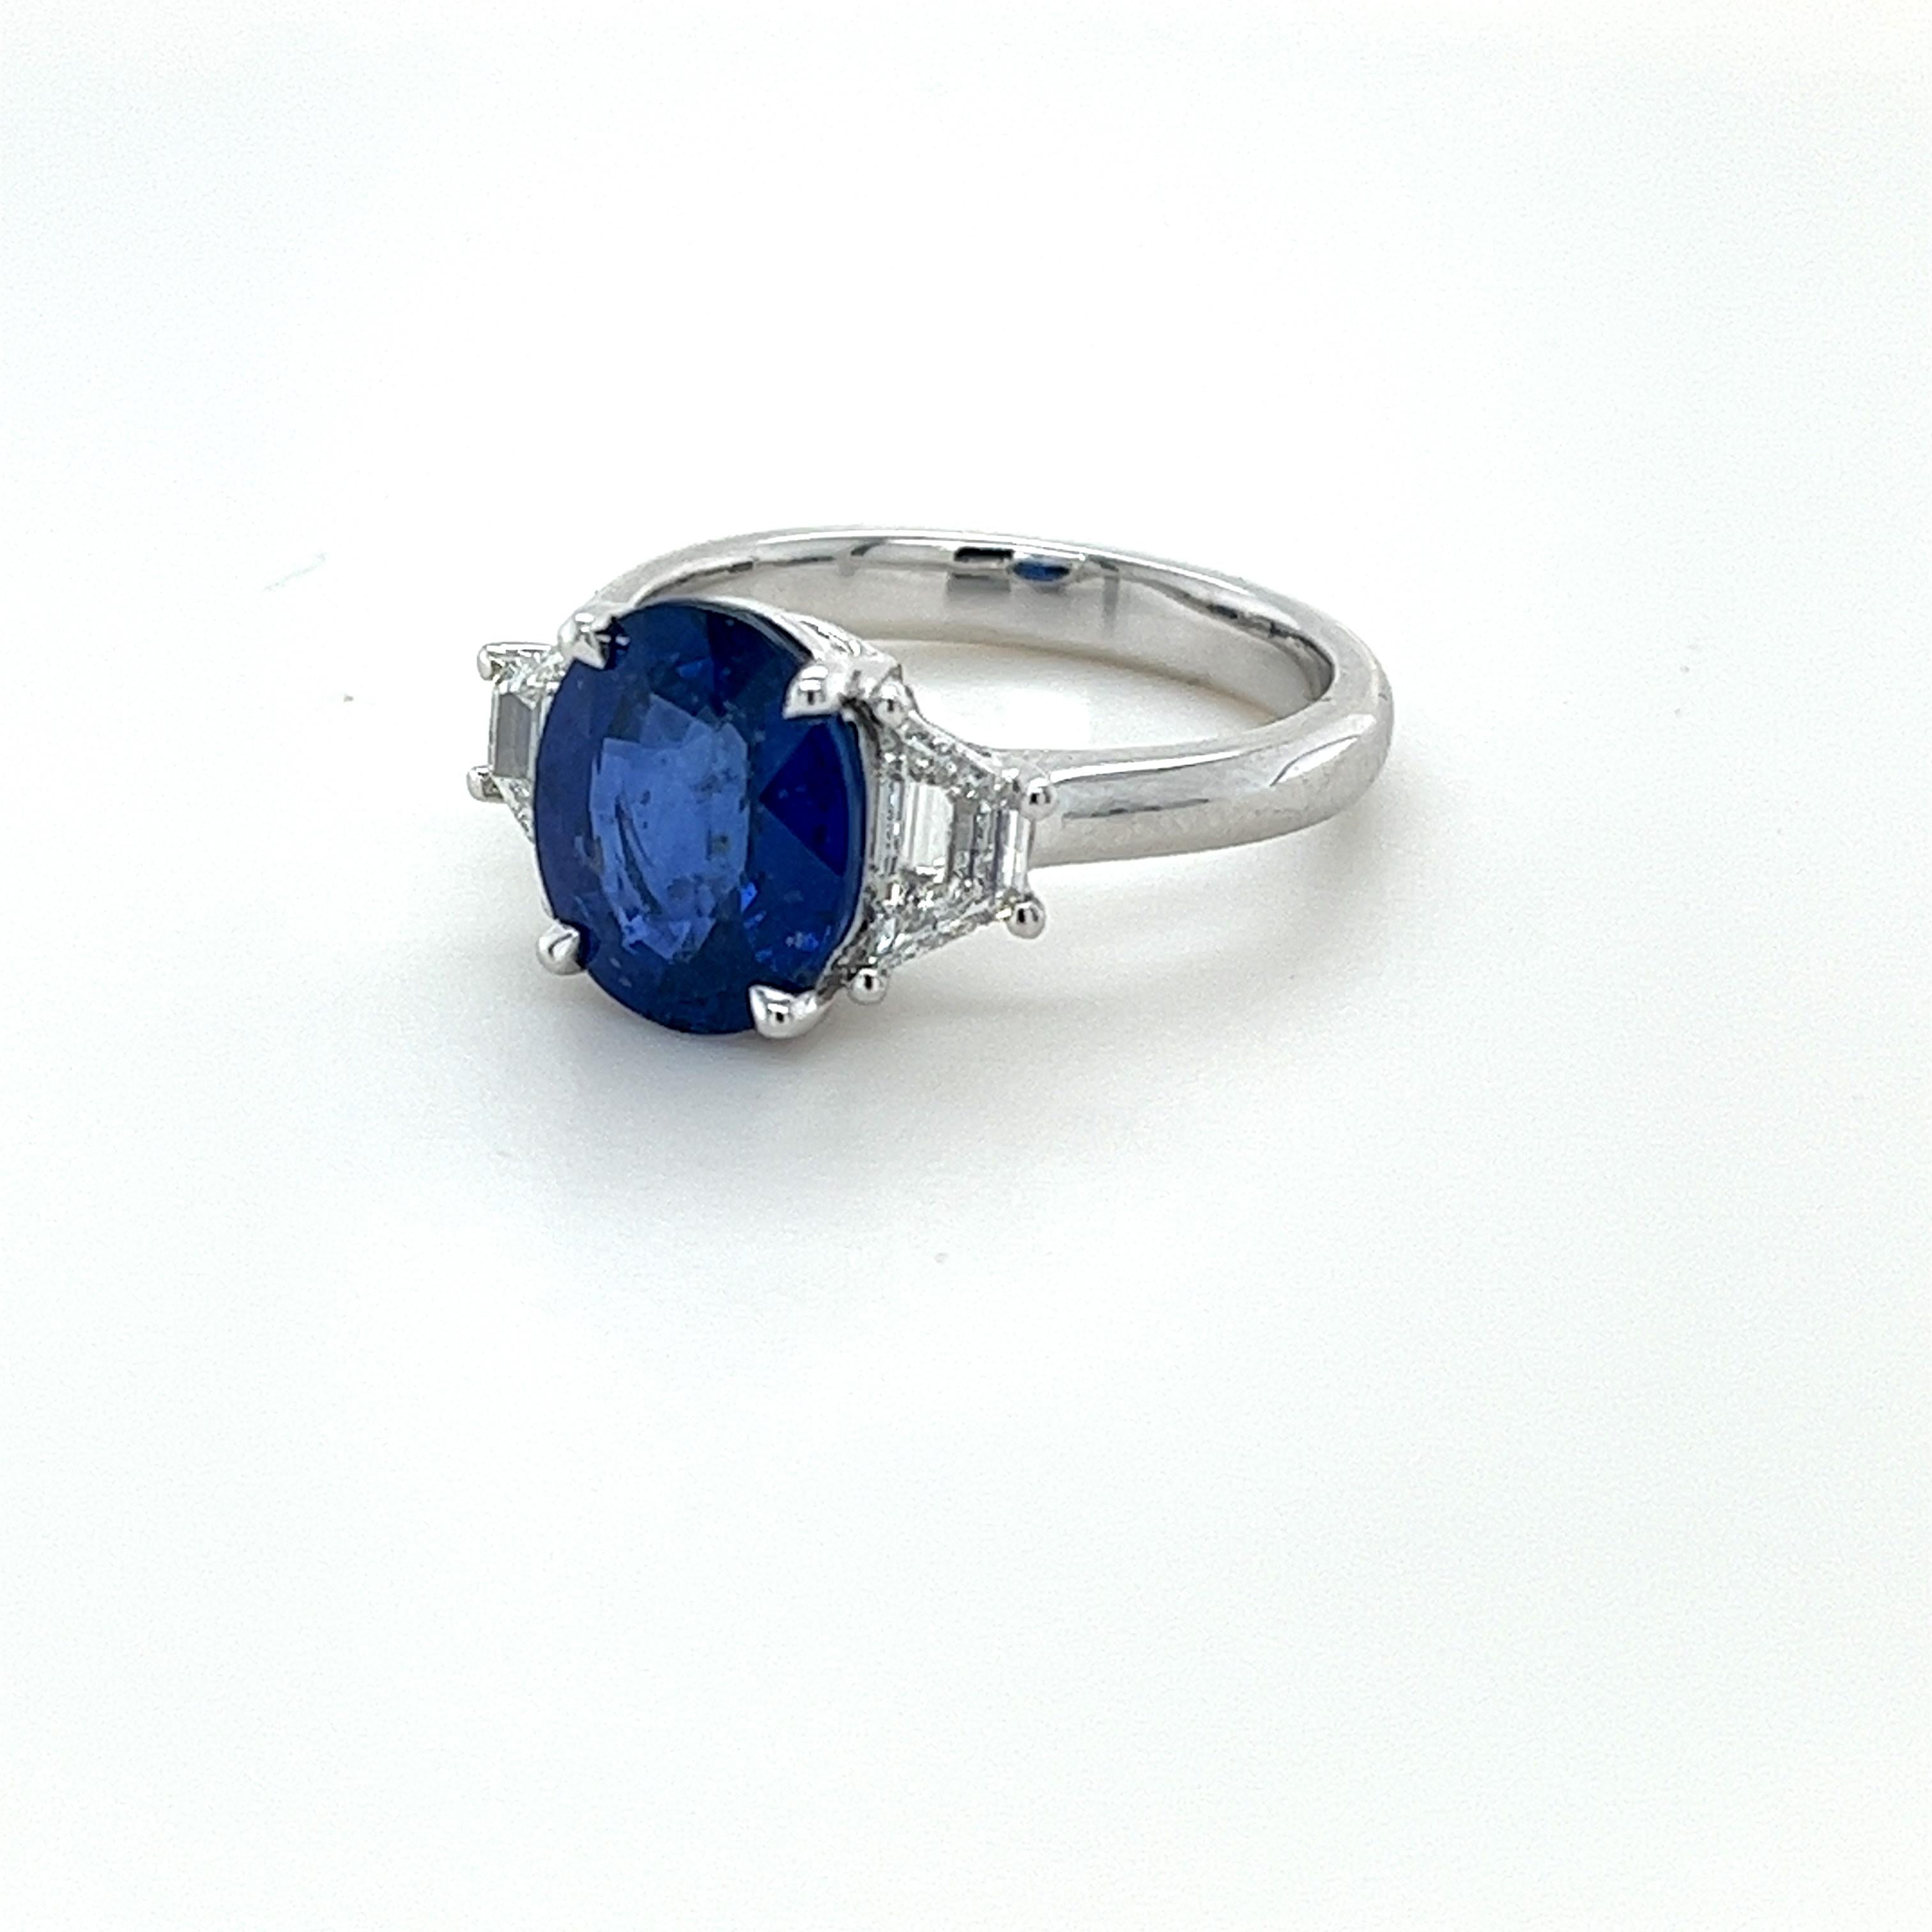 Oval Ceylon Sapphire weighing 3.52 carats
Measuring (10.23x8.33x4.91) mm
Diamonds weighing .62 carats
Diamonds are F-VS
Set in platinum ring
7.21 grams
